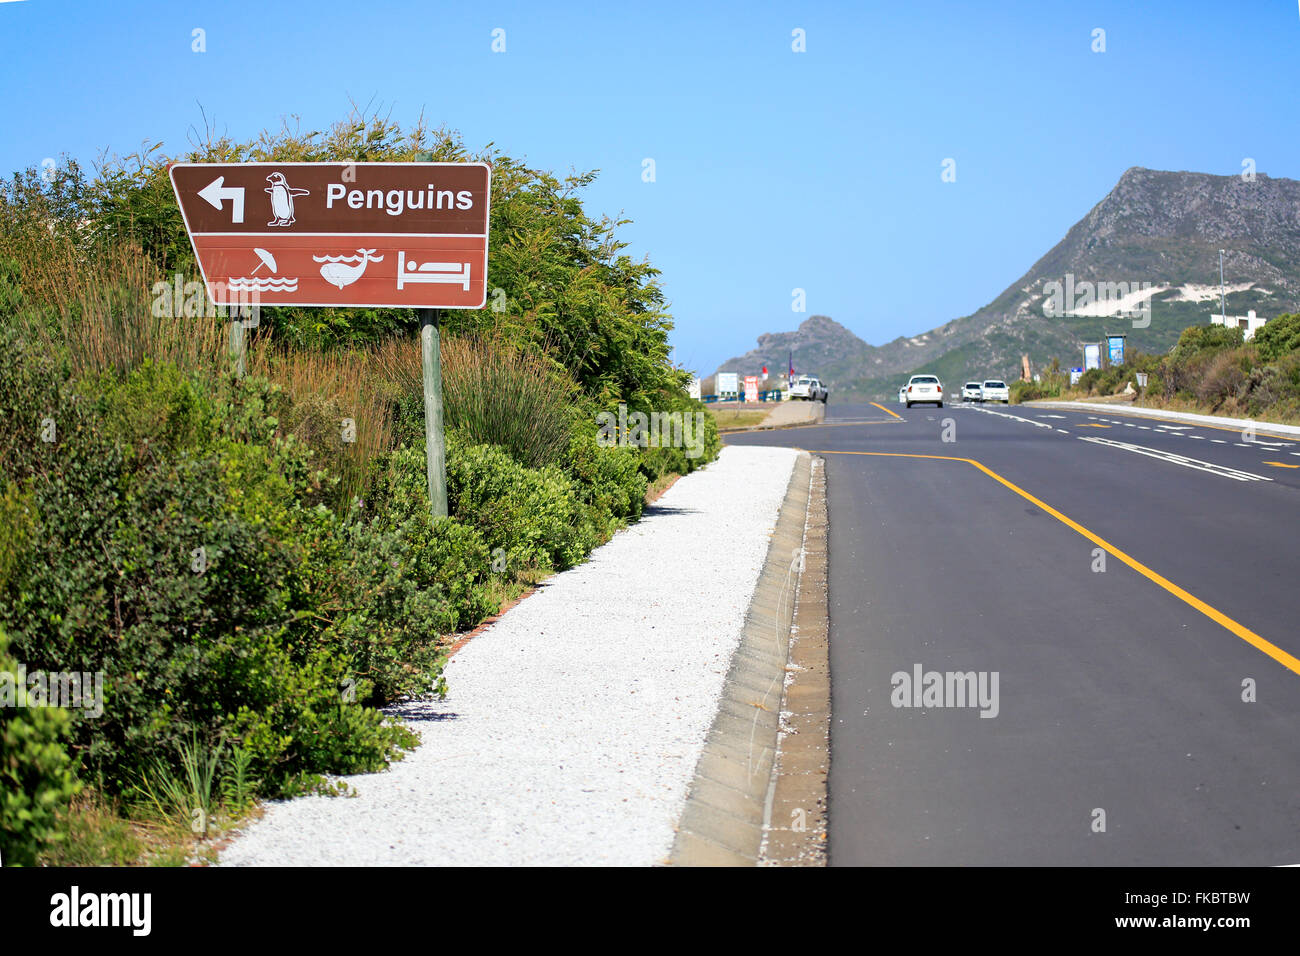 Signpost to penguins and whalewatch, roadsign, direction to penguins, direction to whale watch, Betty's Bay, Western Cape, South Africa, Africa Stock Photo